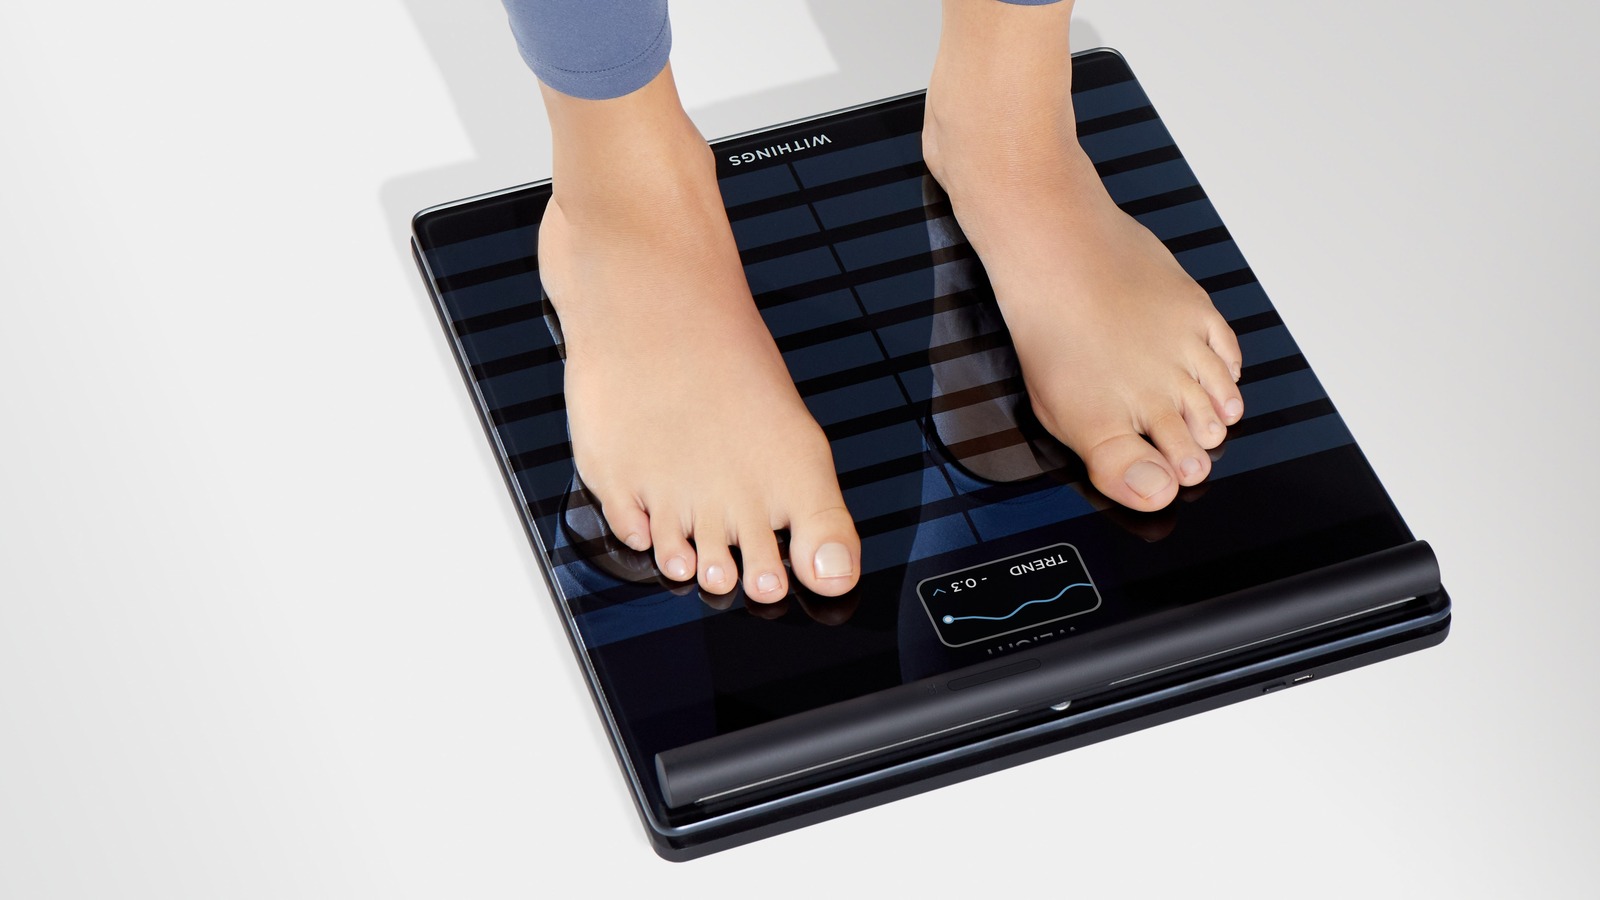 Withings Body Scan - Connected Health Station Smart Scale